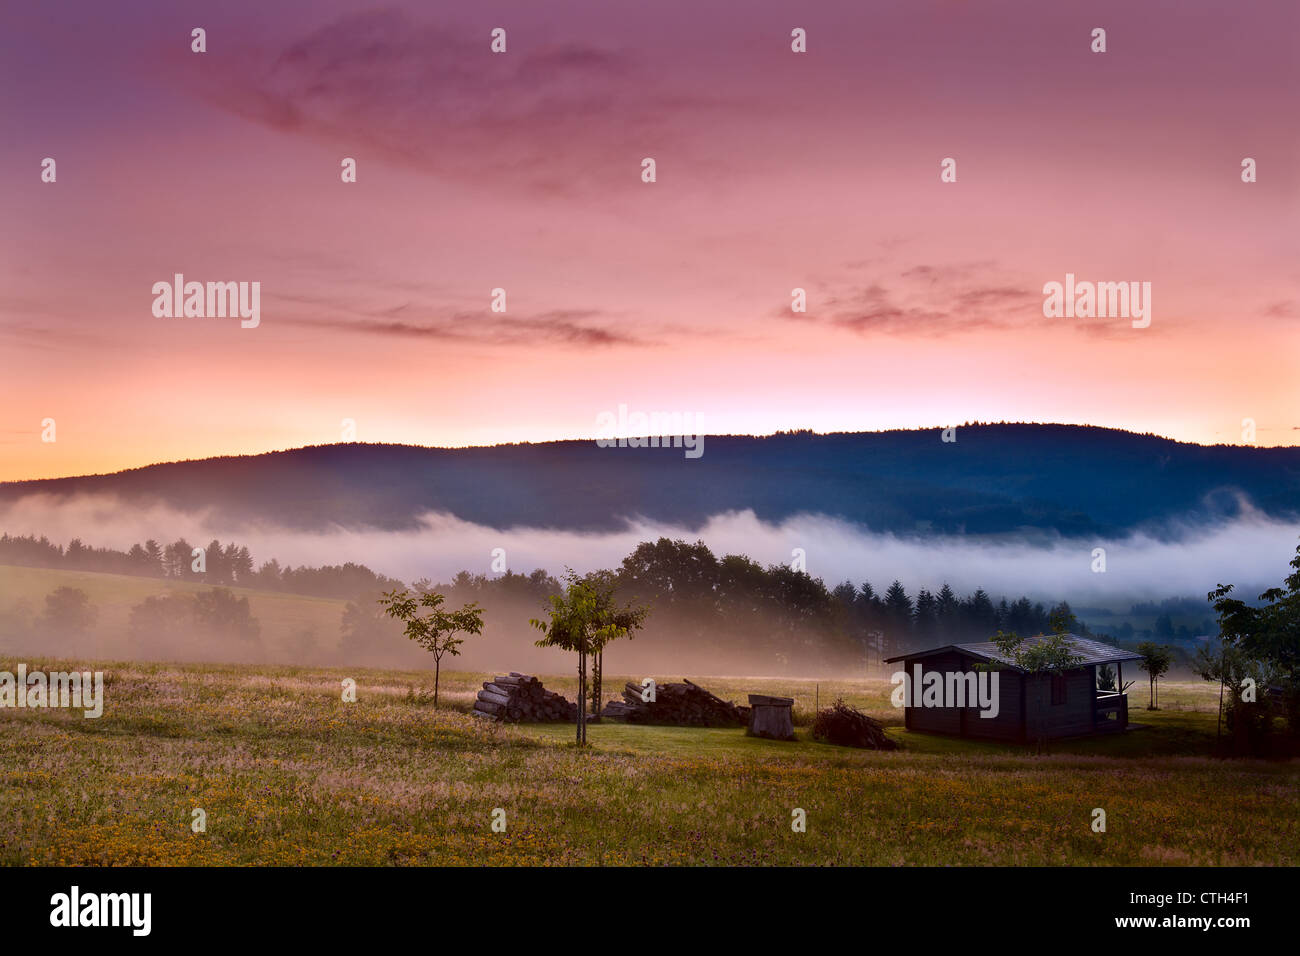 colorful sunrise on alpine meadows with wooden farm house Stock Photo